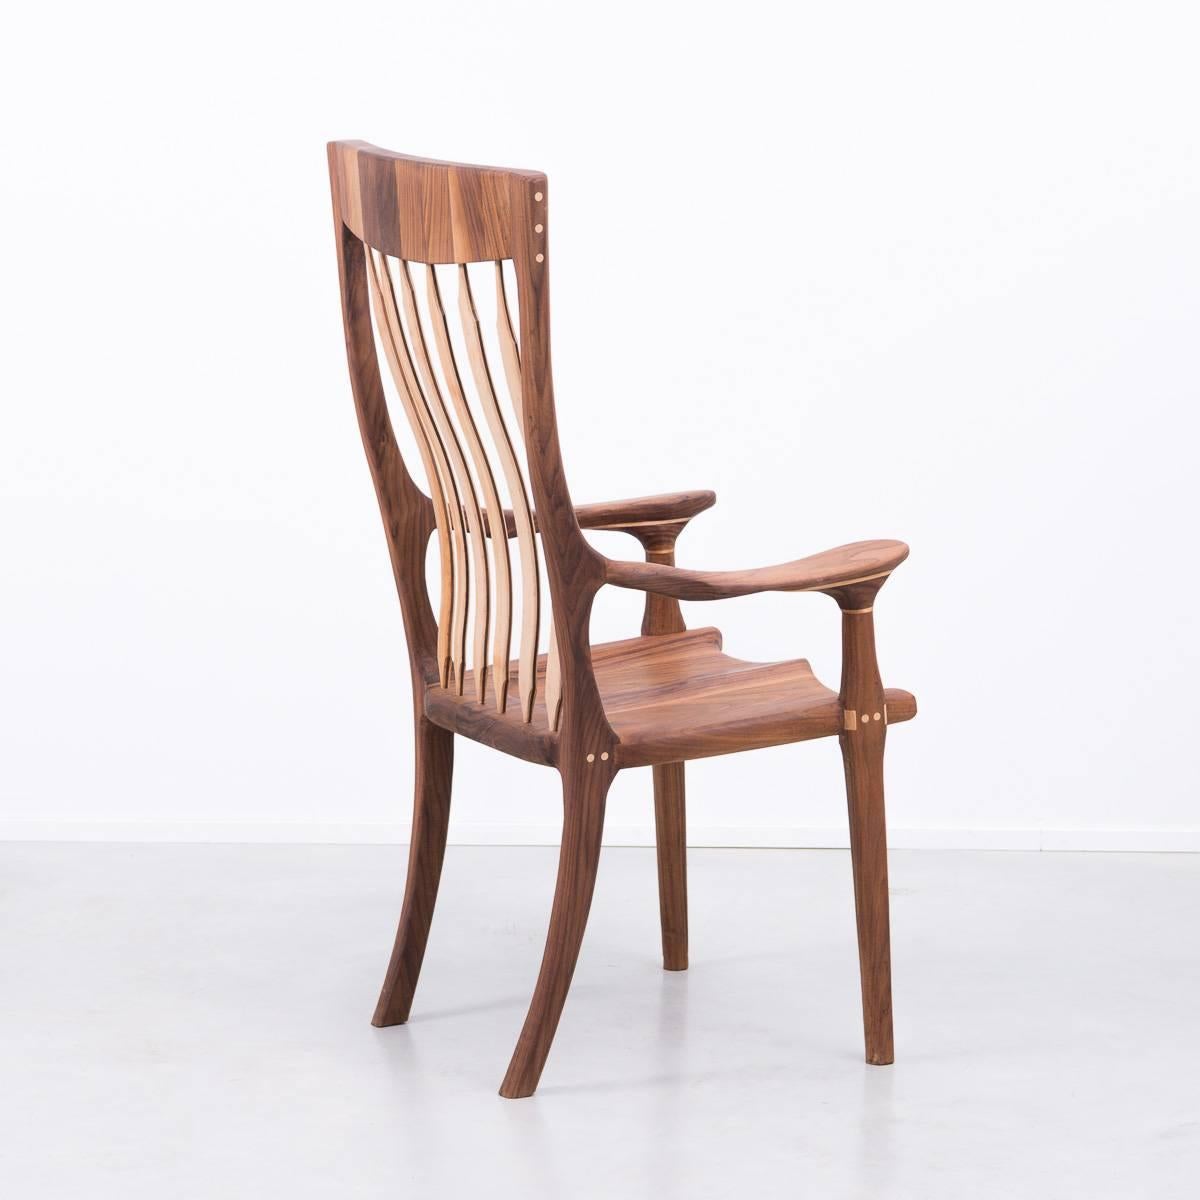 British Walnut and Maple Chair in Manner of Sam Maloof